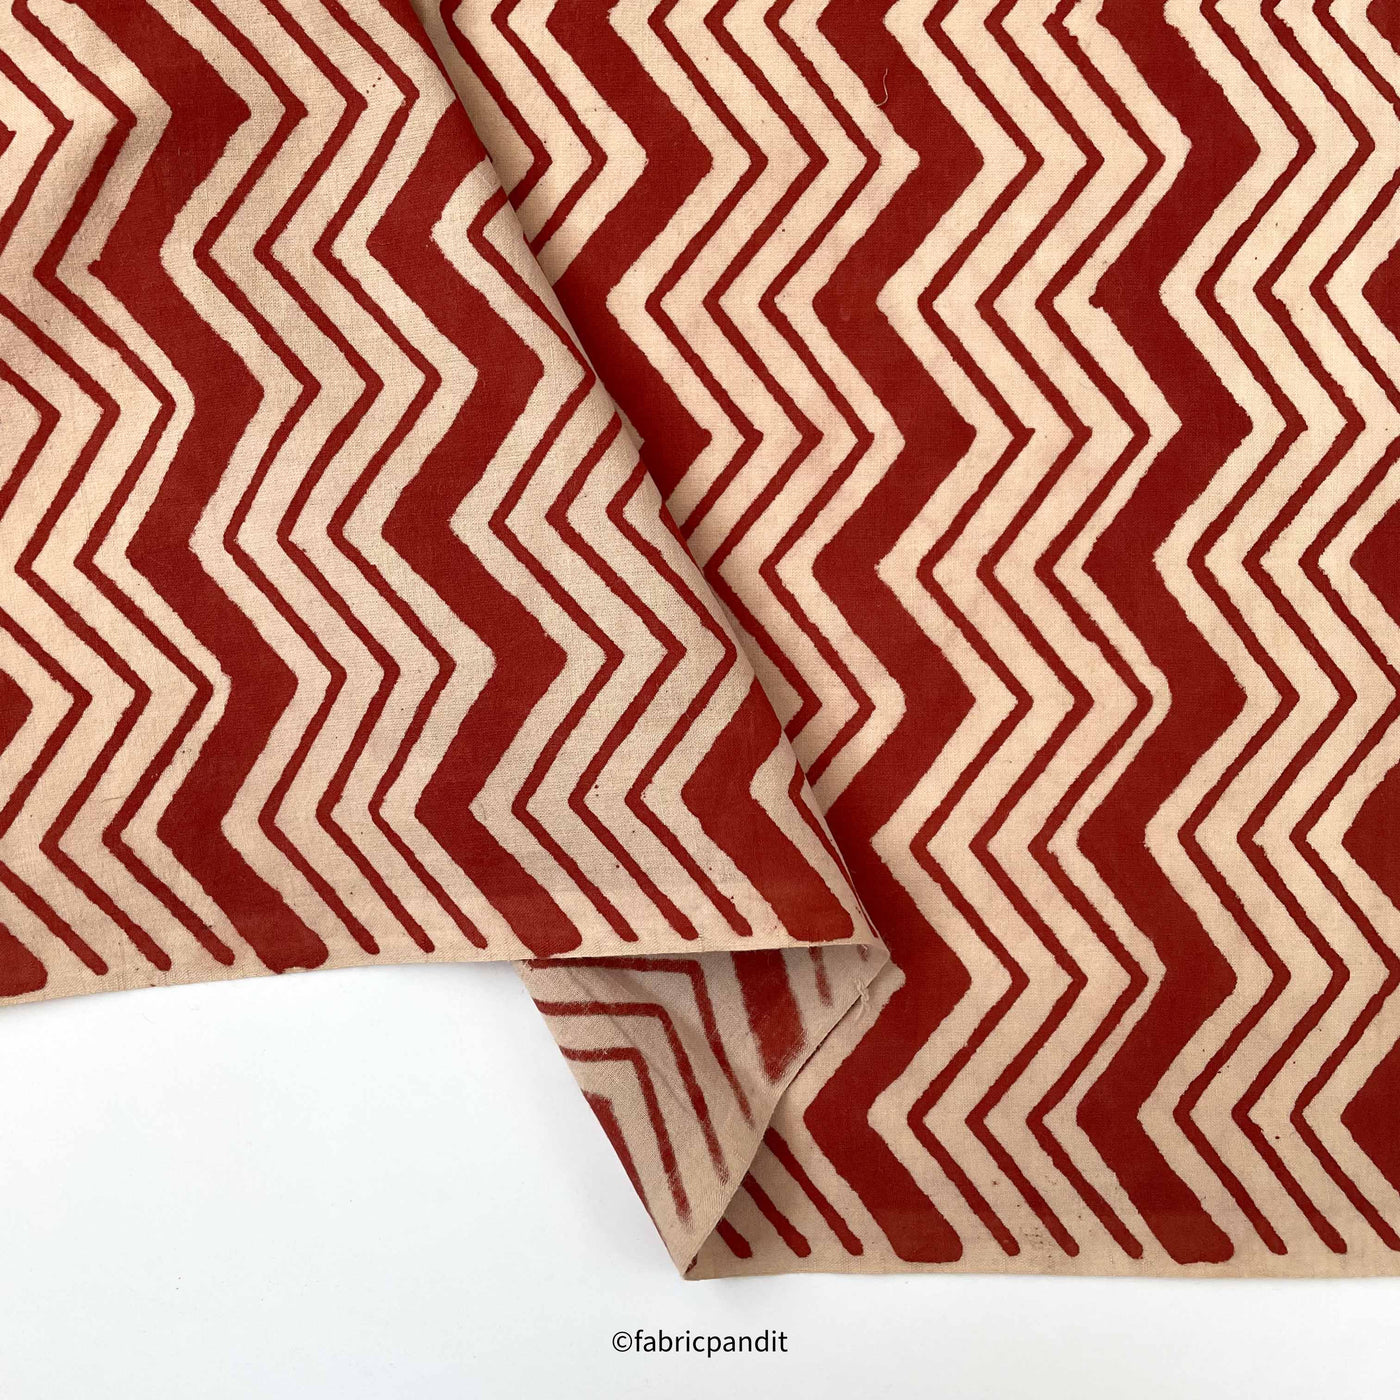 Fabric Pandit Fabric Dusty Red & Beige Zig-Zag Authentic Bagru Hand Block Printed Pure Cotton Fabric (Width 42 inches)